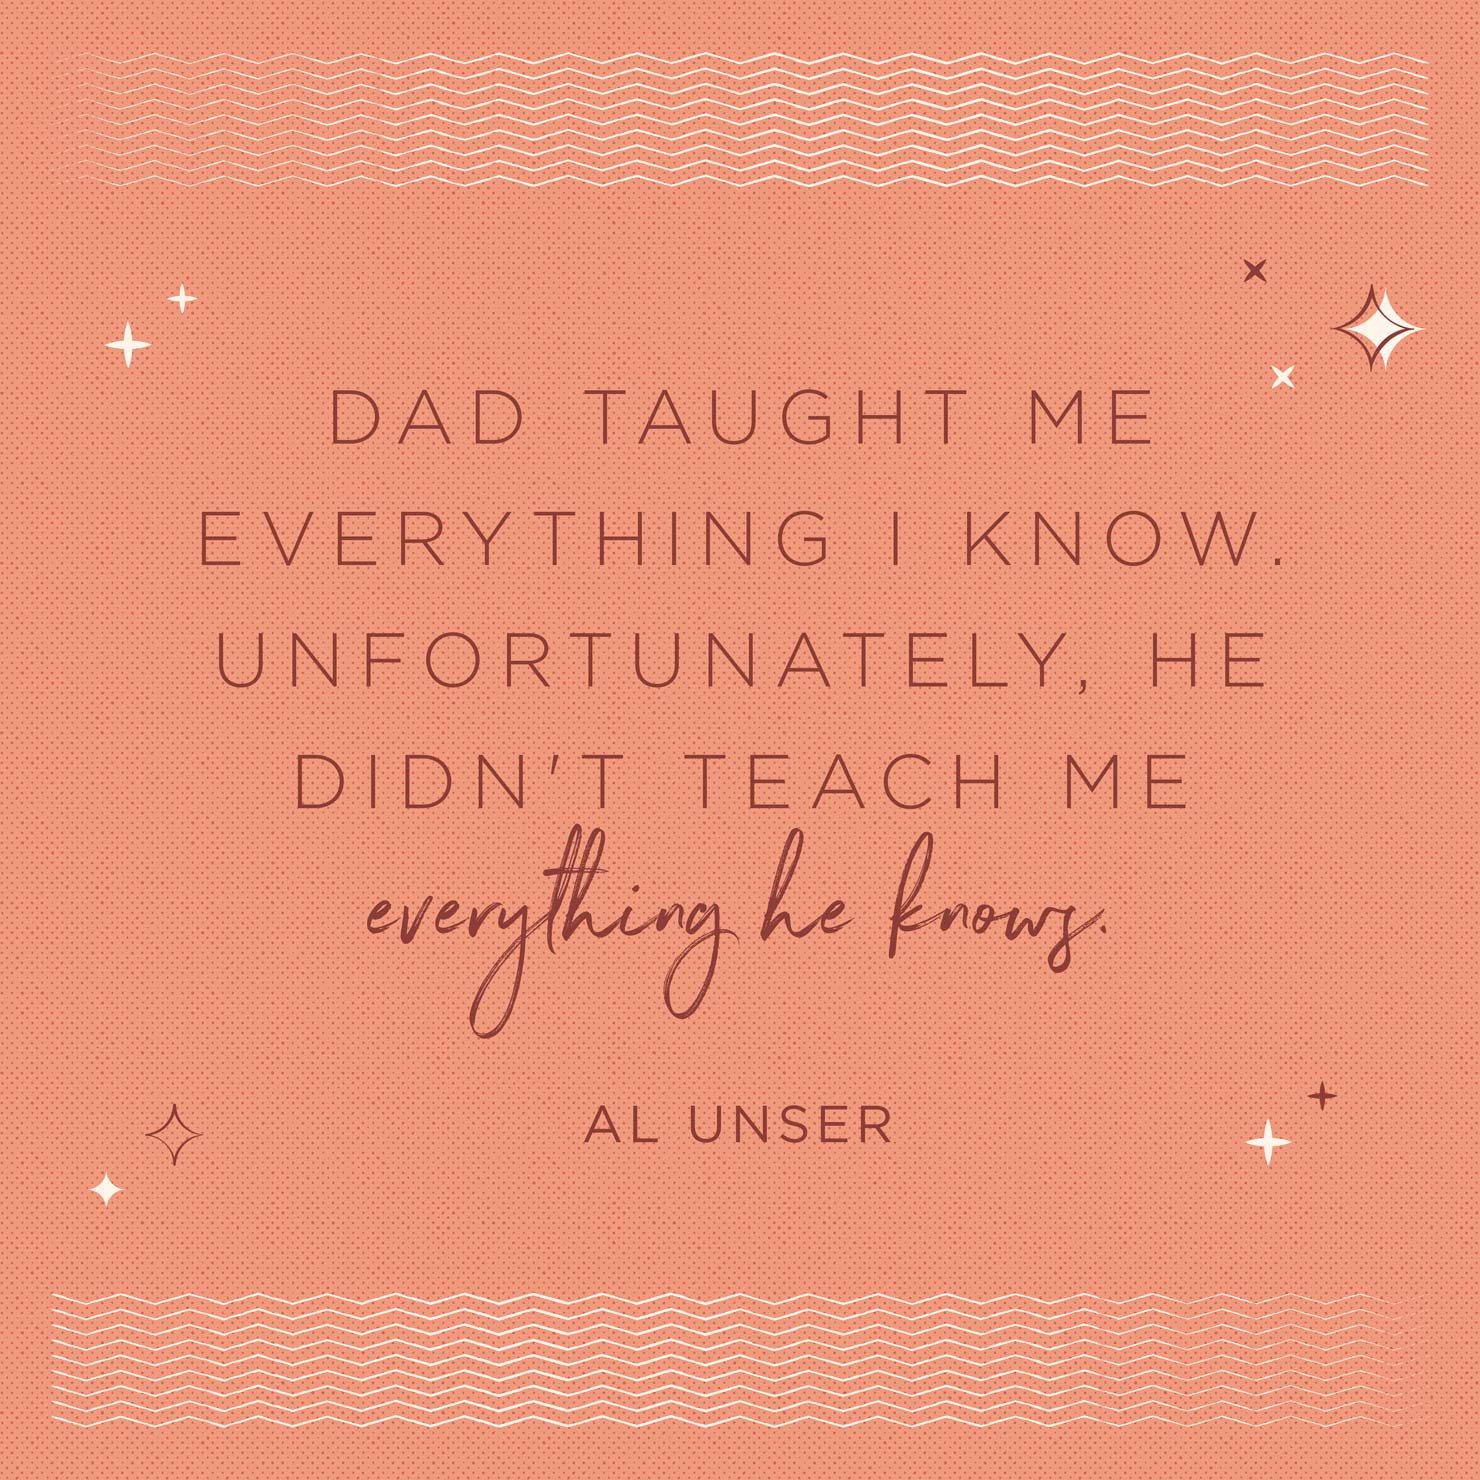 Fathers Day Quote Funny
 100 Happy Father’s Day Quotes [2019]